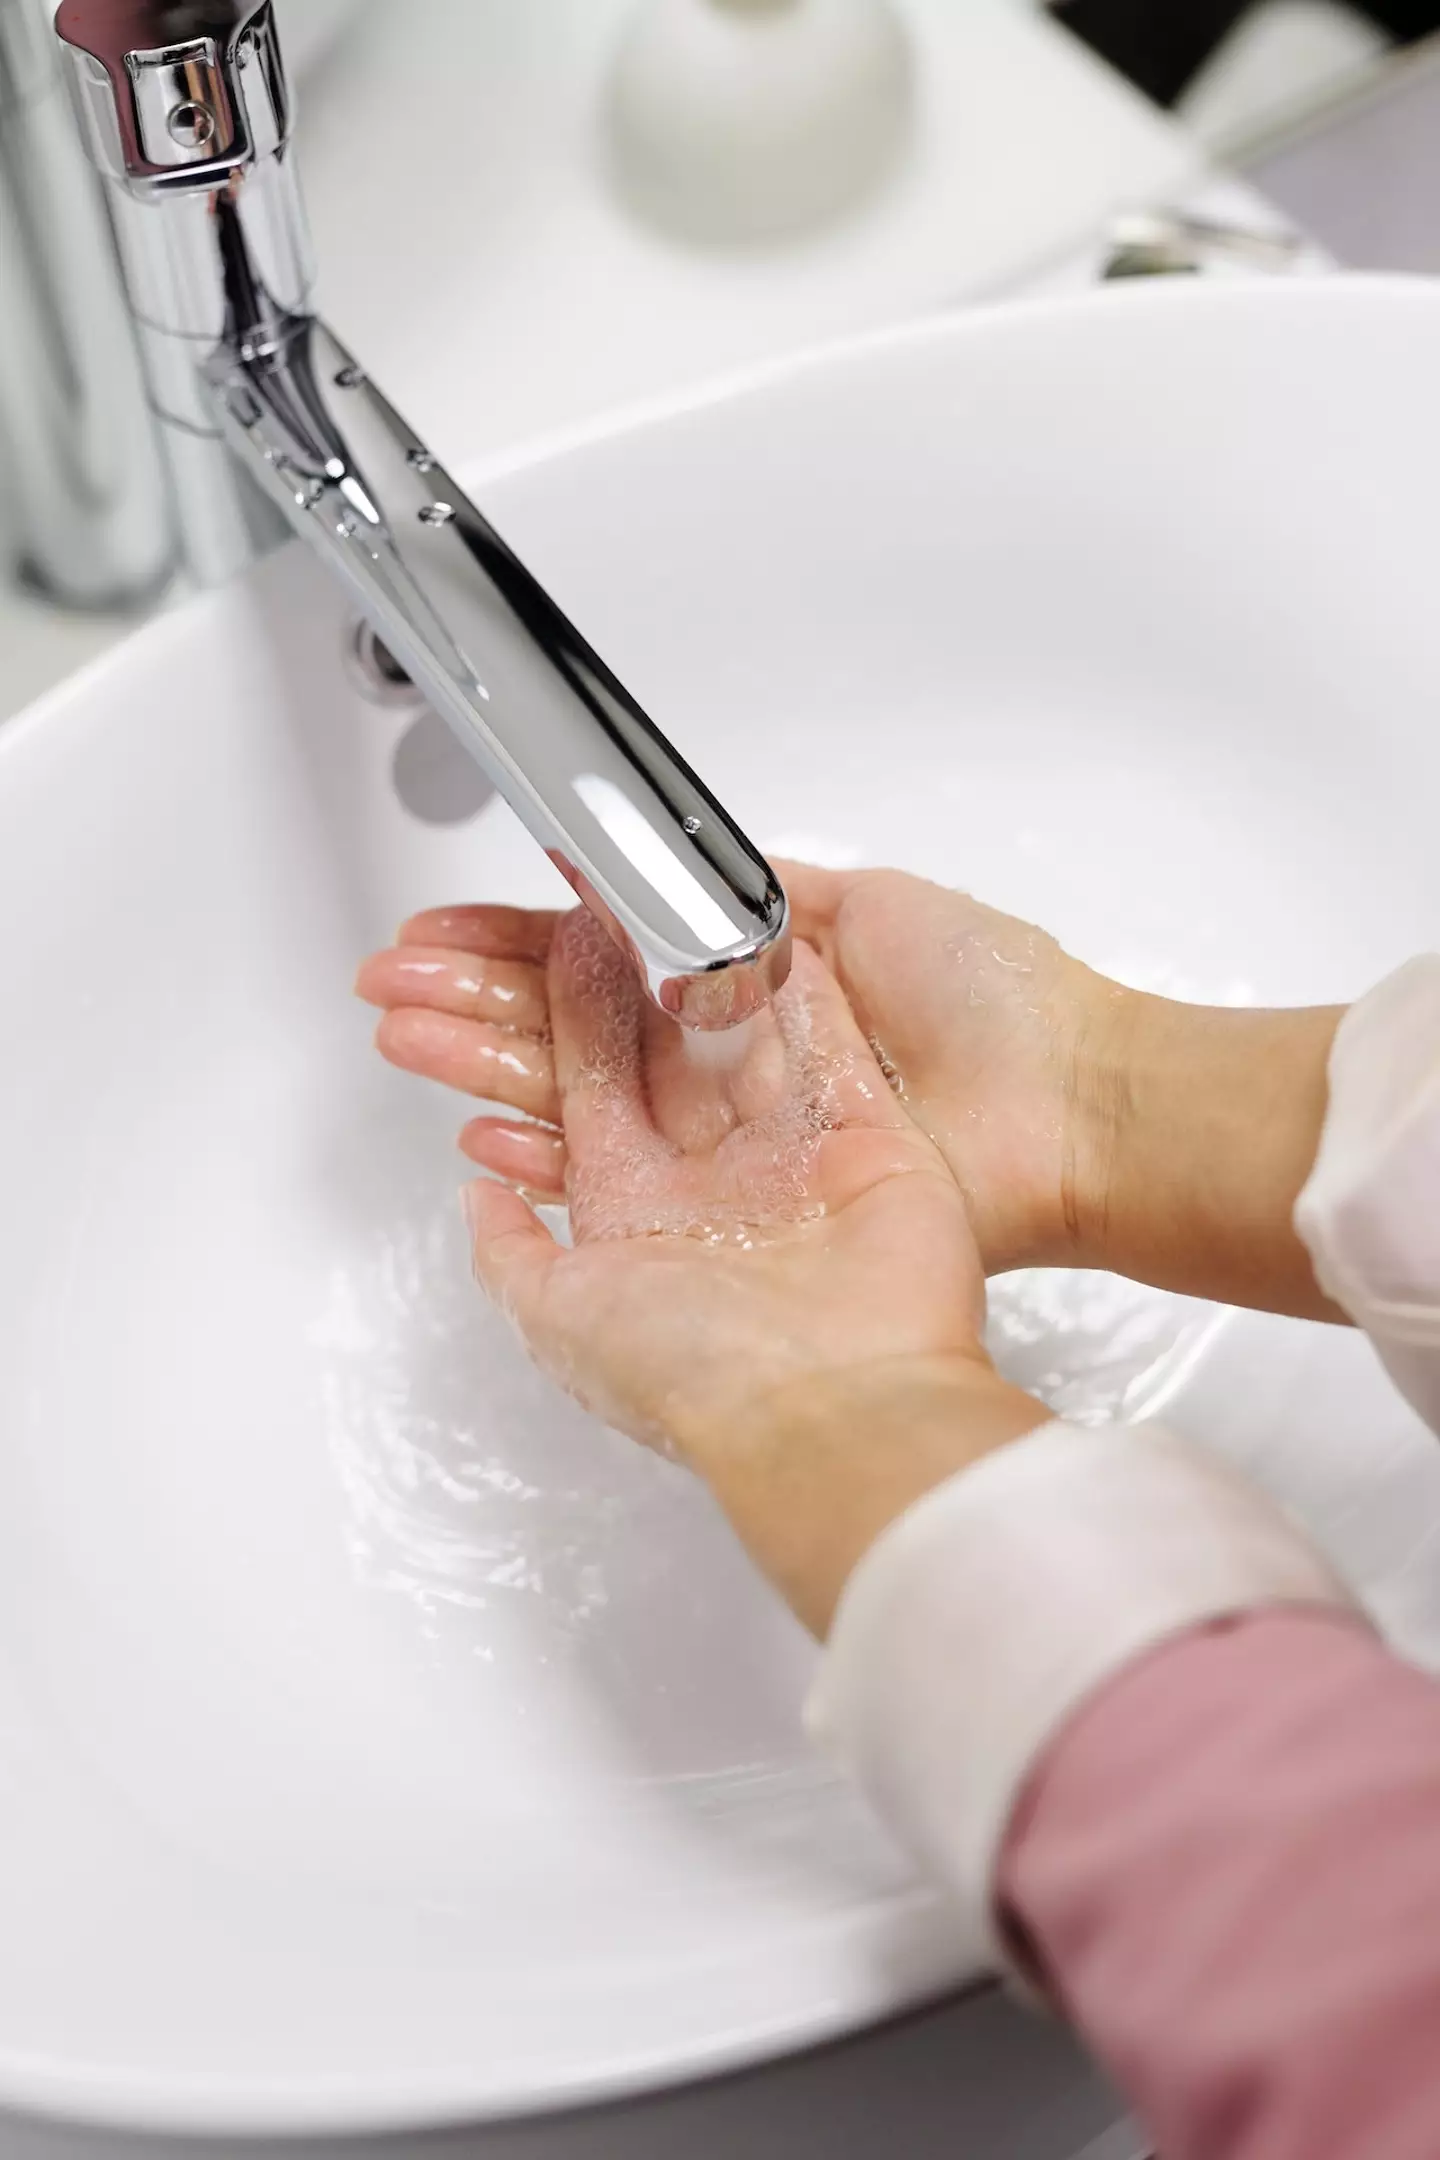 Over 58 percent of US adults claim that they wash their hands.